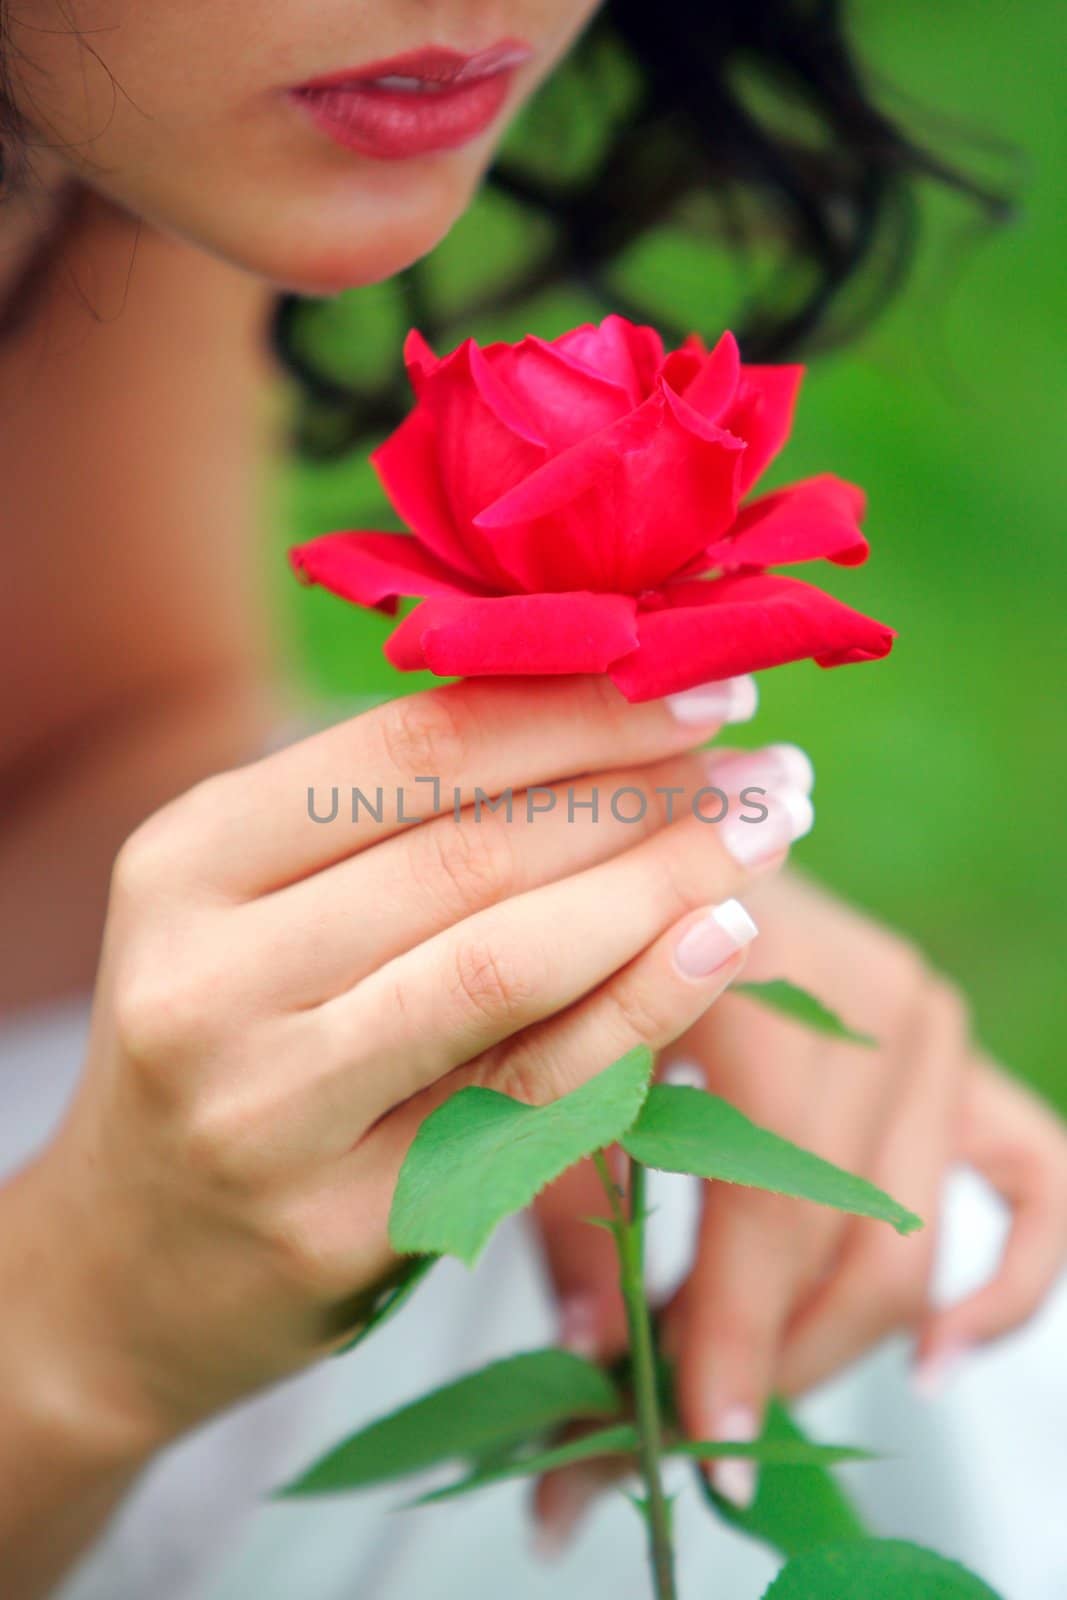 Young woman with red rose, green nature background, Focus on rose in foreground.